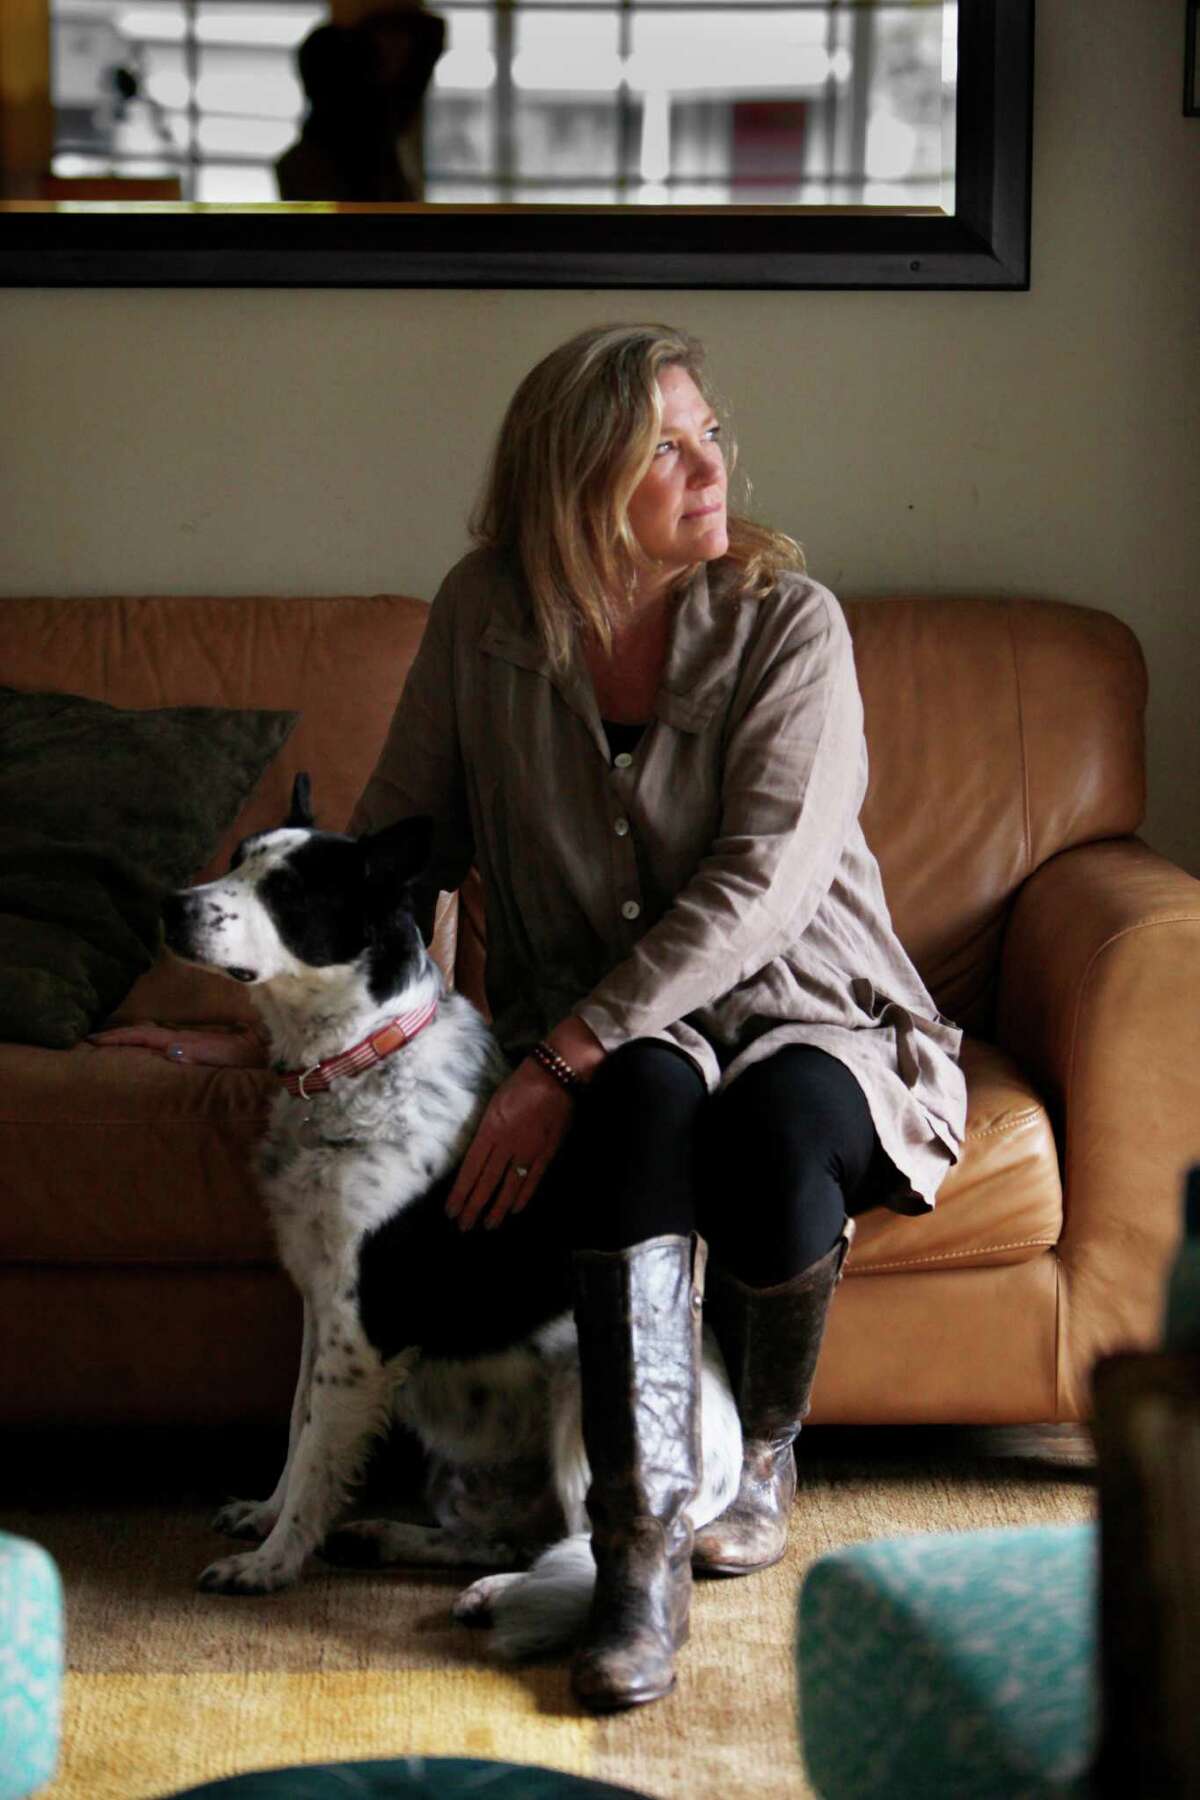 Nancy Schultz (right), widow of Dave Schultz, sits for a portrait with Truman (left) in her home on Wednesday, November 19, 2014 in San Carlos, Calif.